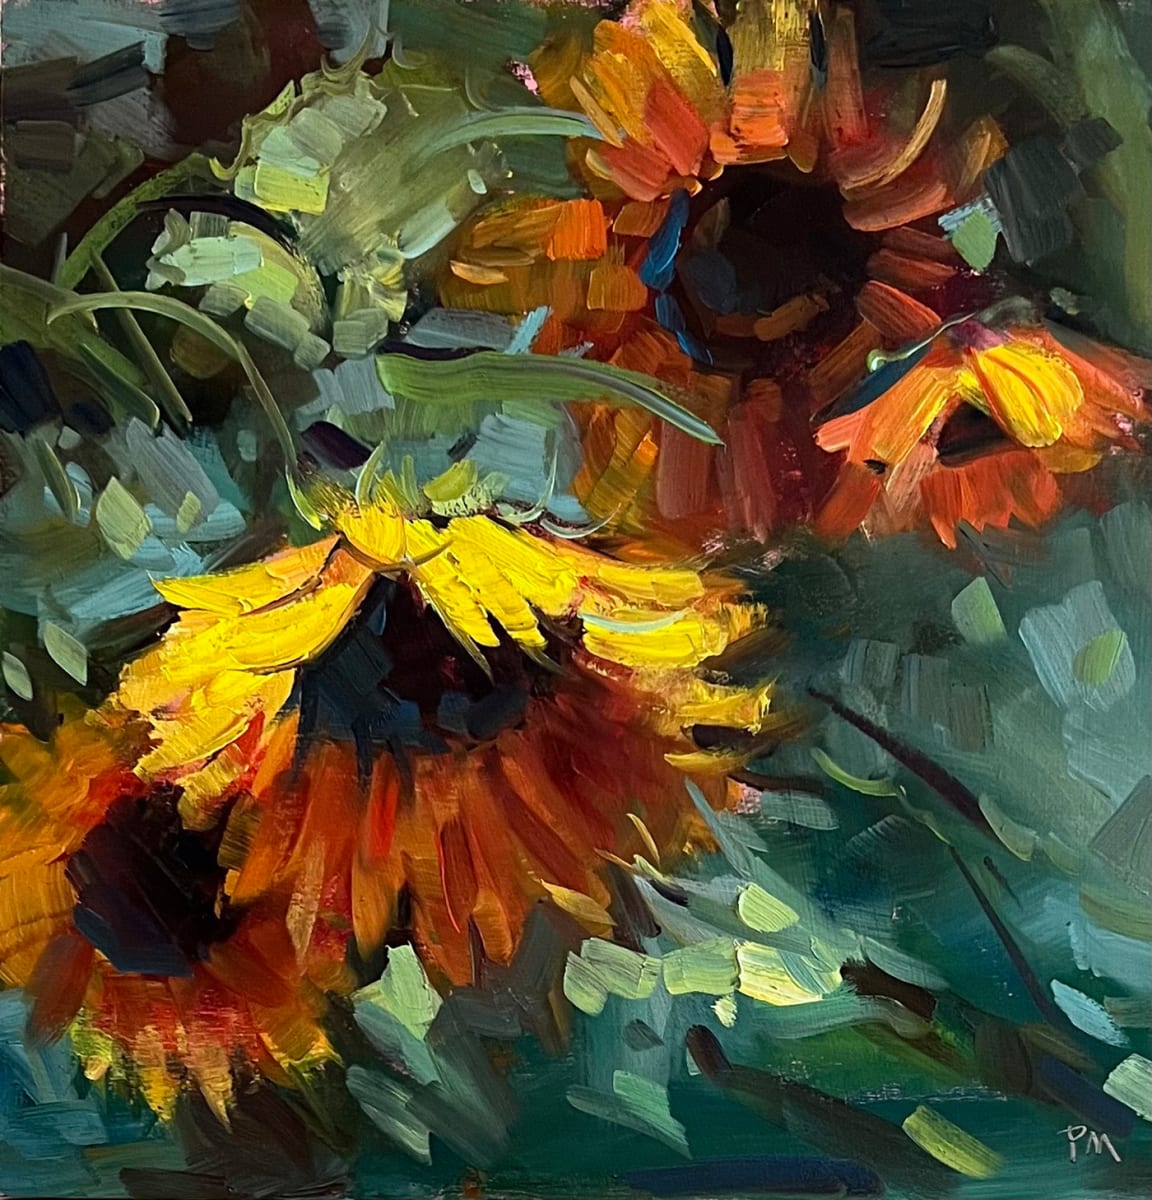 Shimmering Sunflowers by Patti McNutt  Image: 12" x 12" Oil on Cradled Board